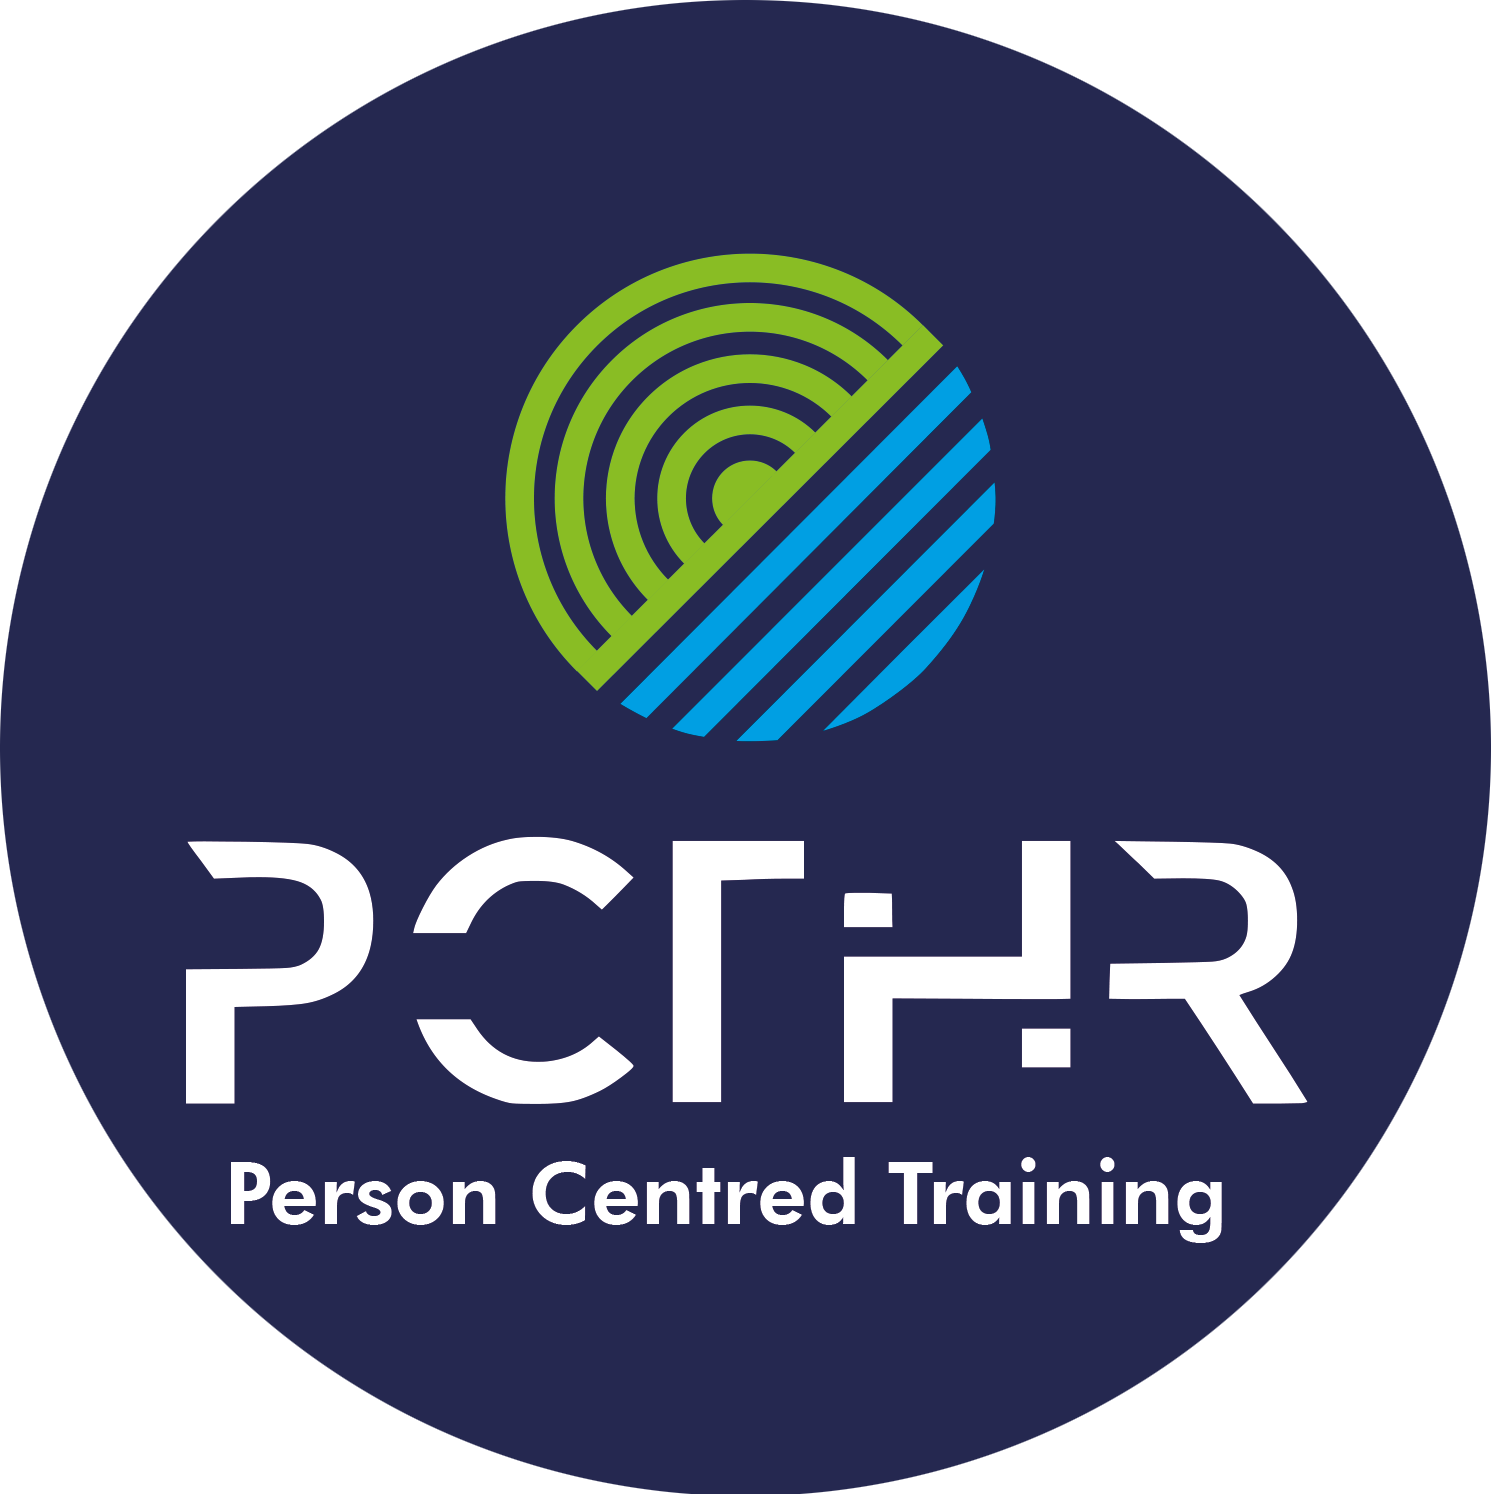 Person Centred Training